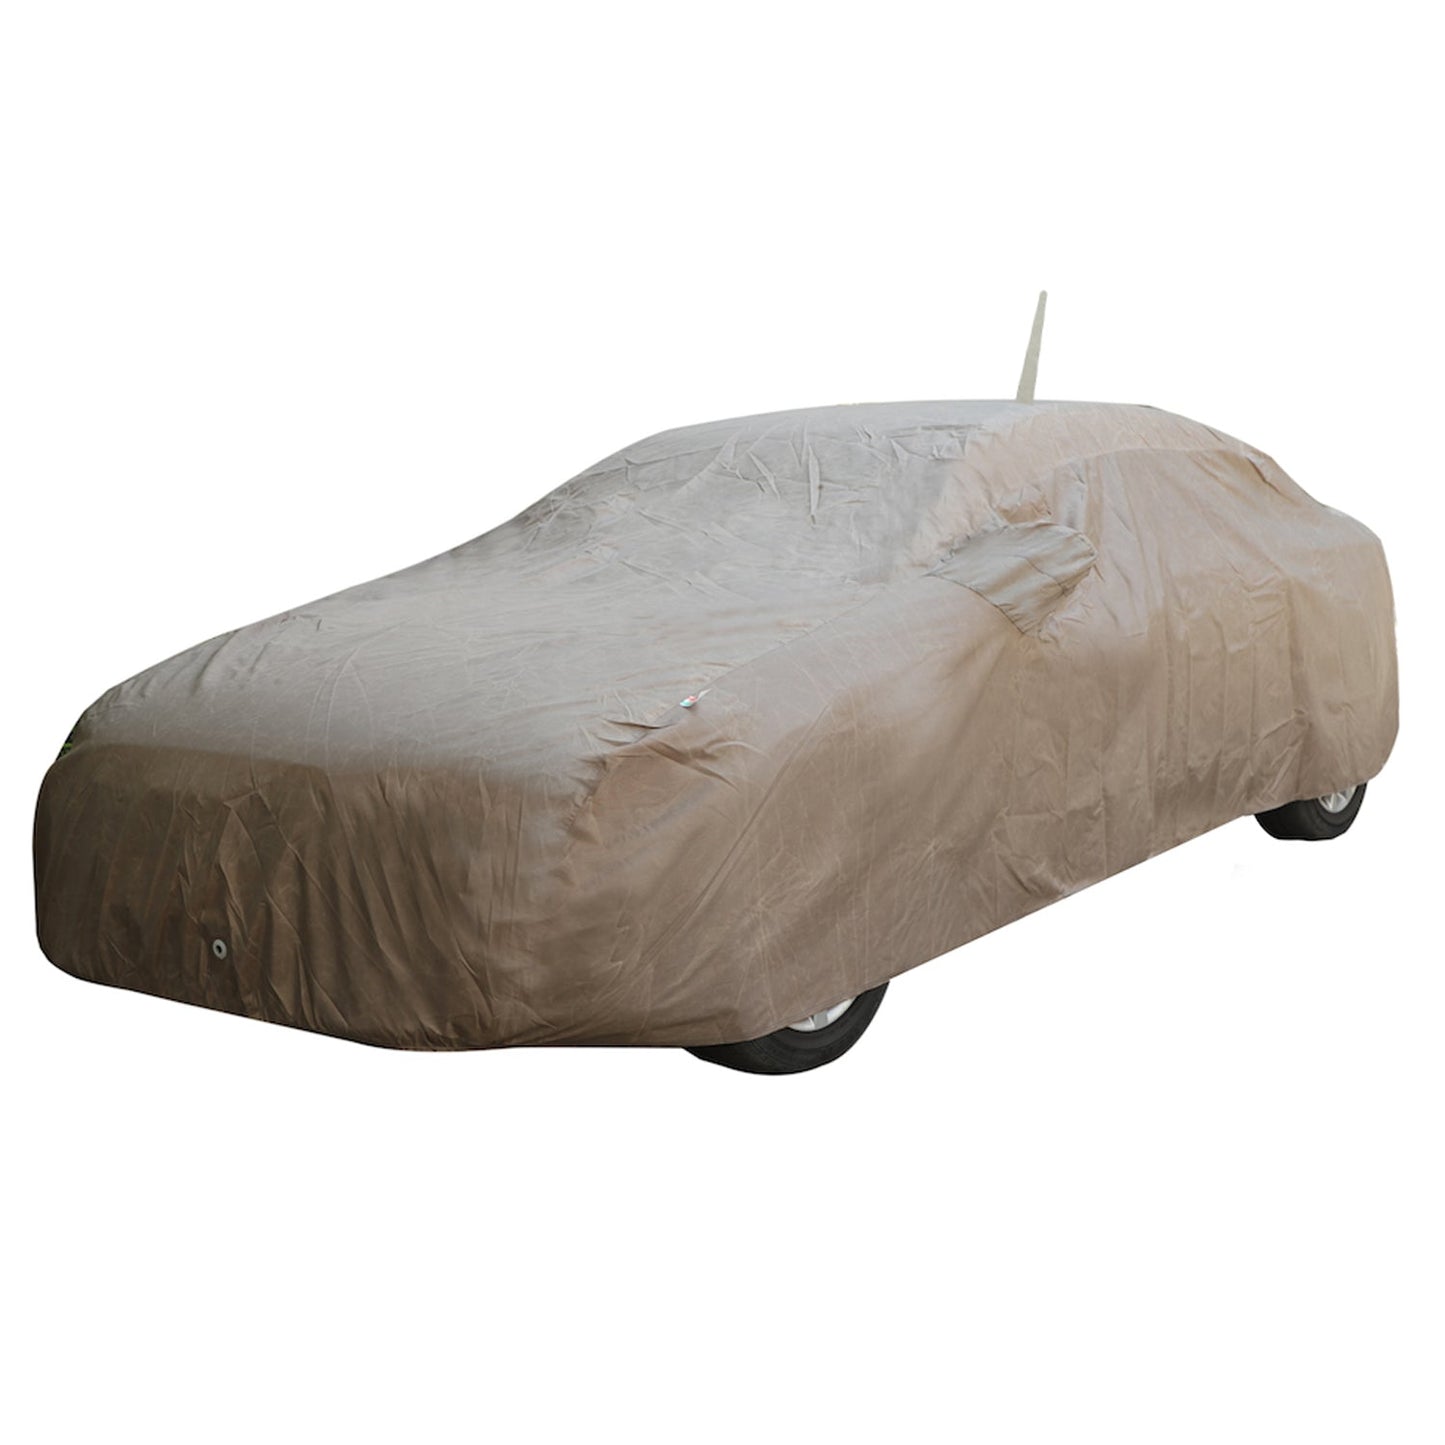 Oshotto Brown 100% Waterproof Car Body Cover with Mirror Pockets For Honda Jazz(with Antenna Pocket)